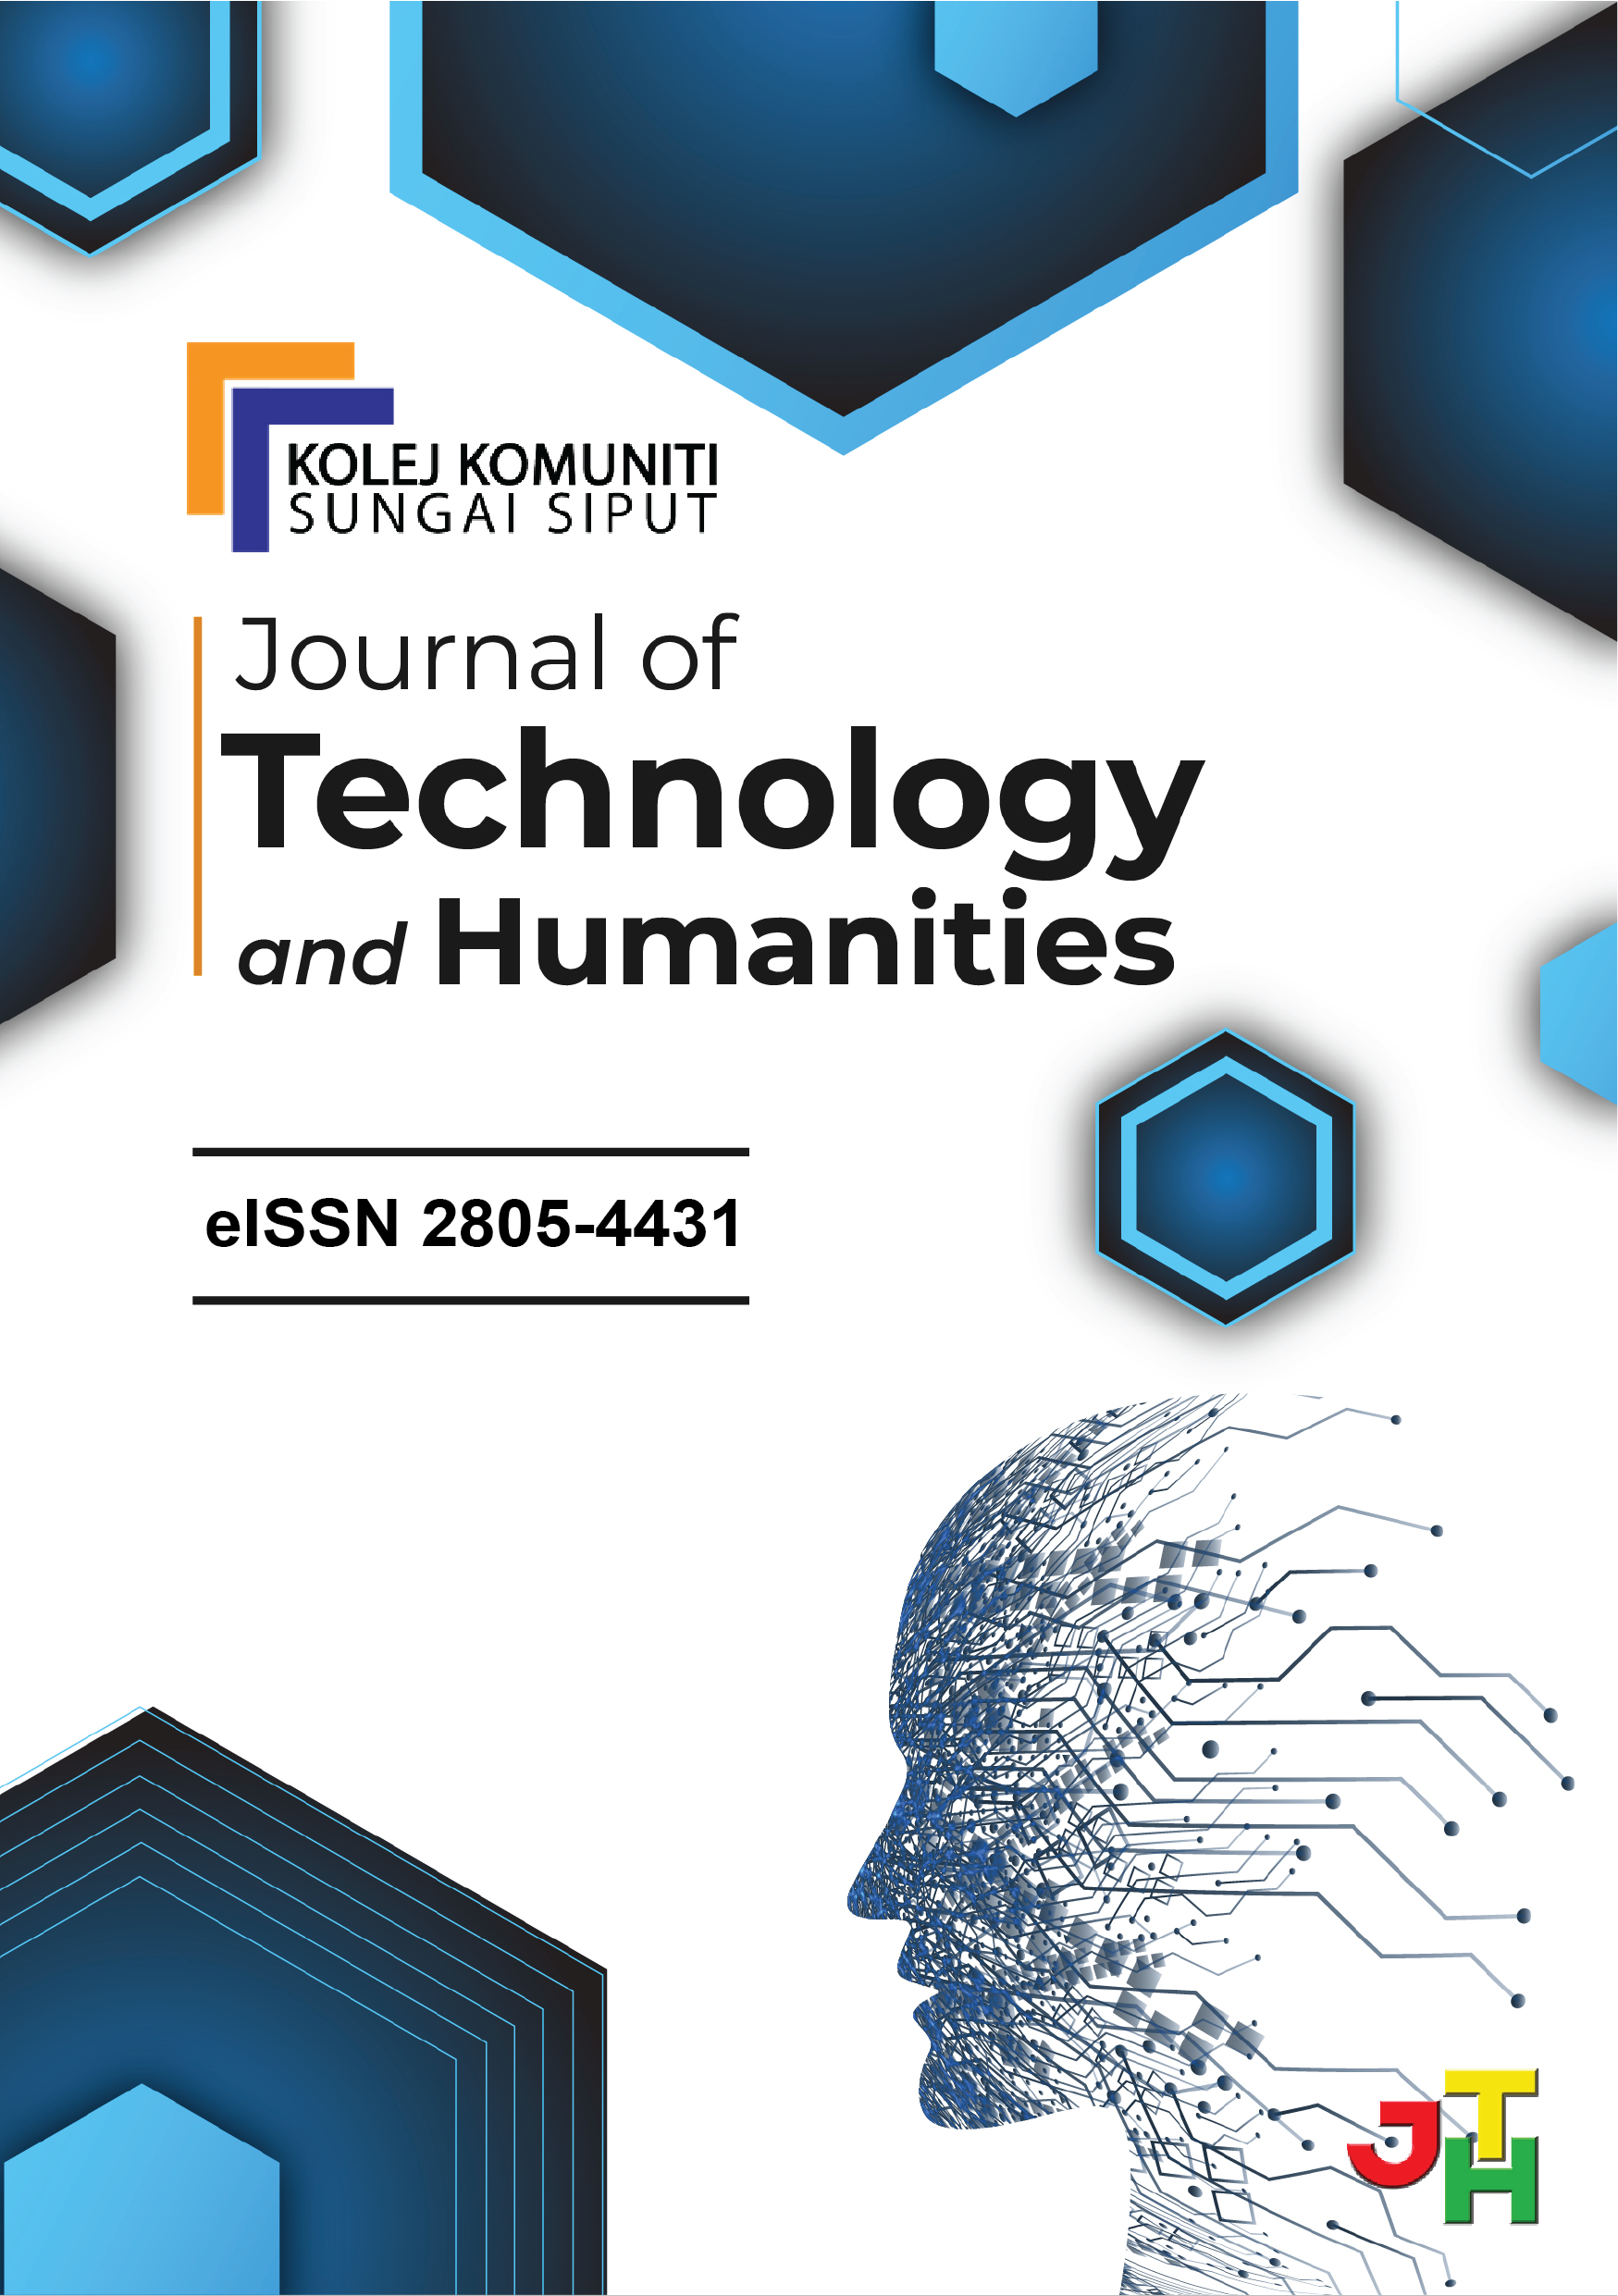 					View Vol. 1 No. 1 (2020): Journal of Technology and Humanities
				